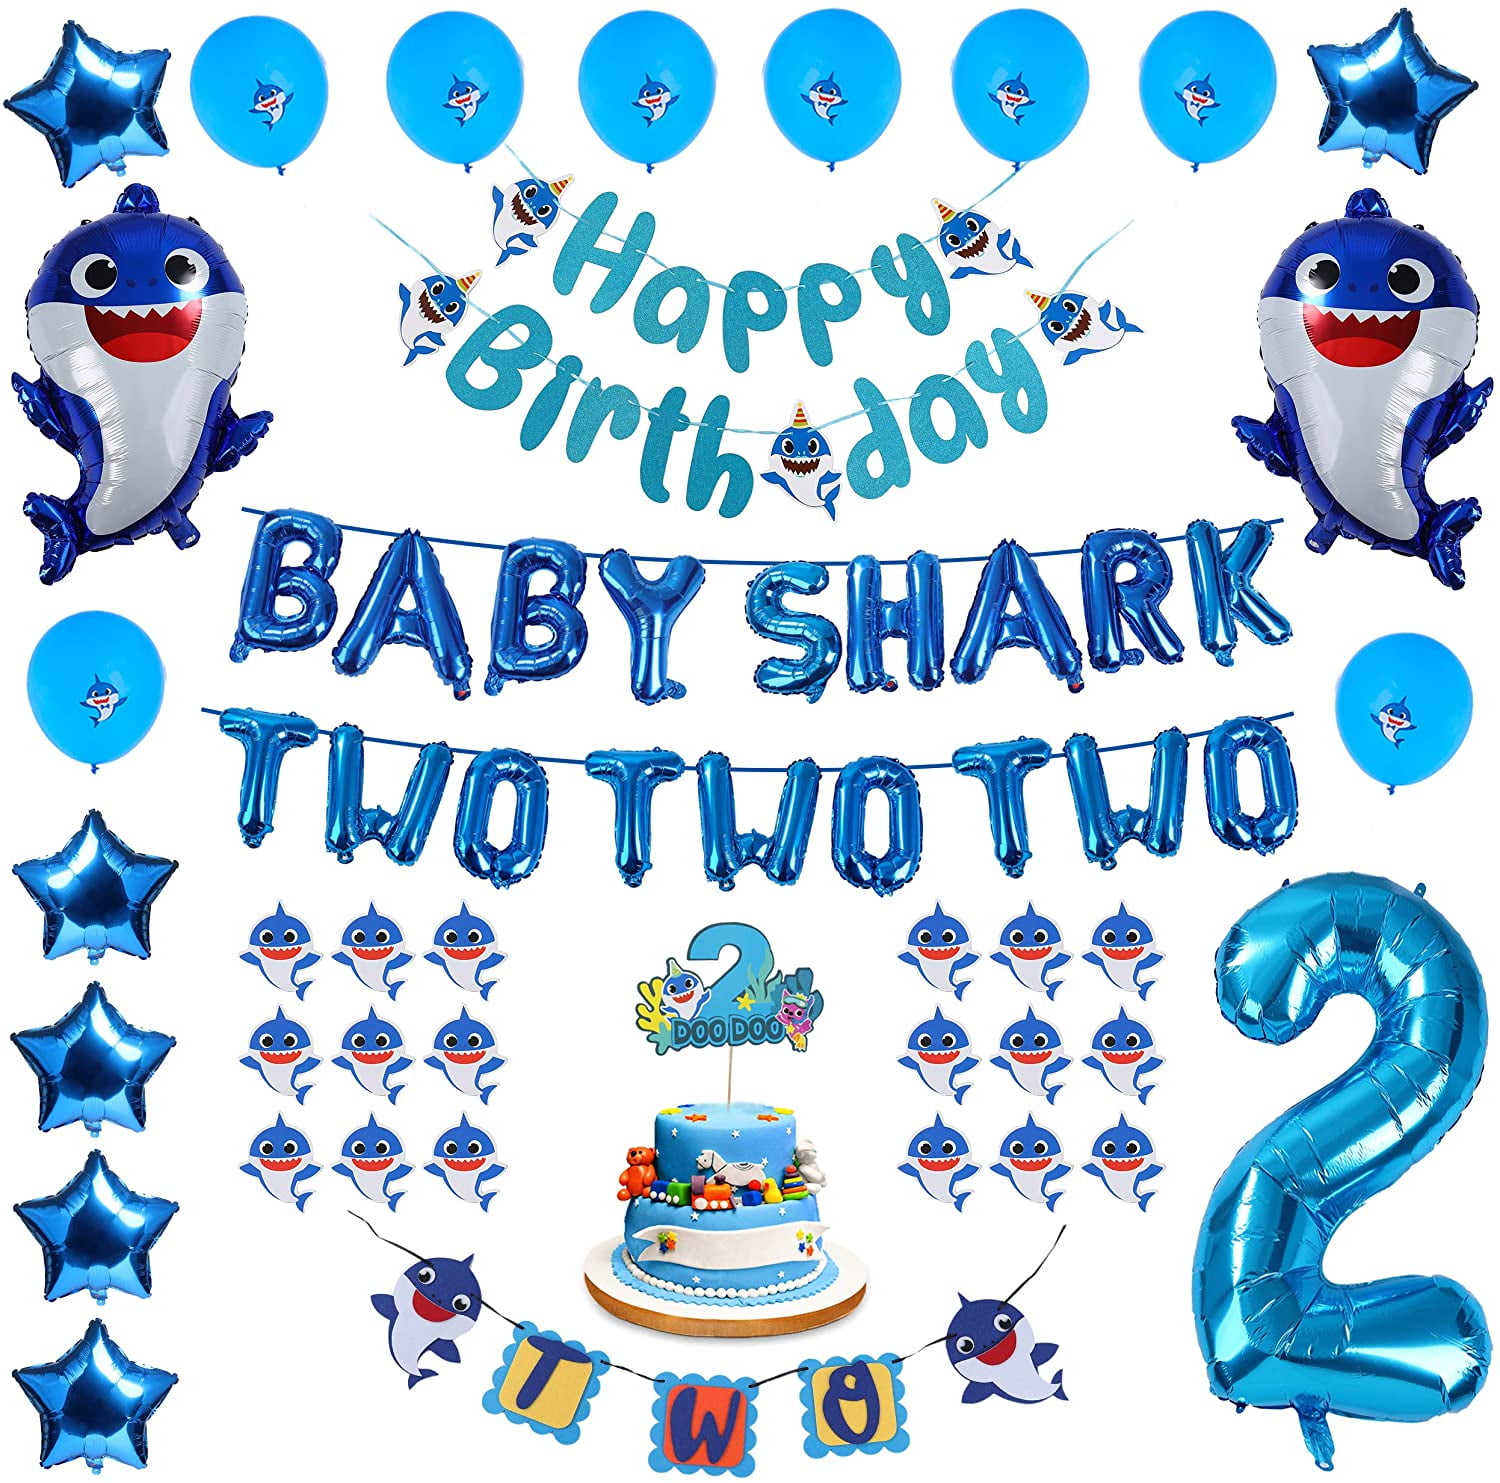 cake toppers choice of Wafer Paper or Icing Details about   21st Birthday Blue 24 x cupcake 